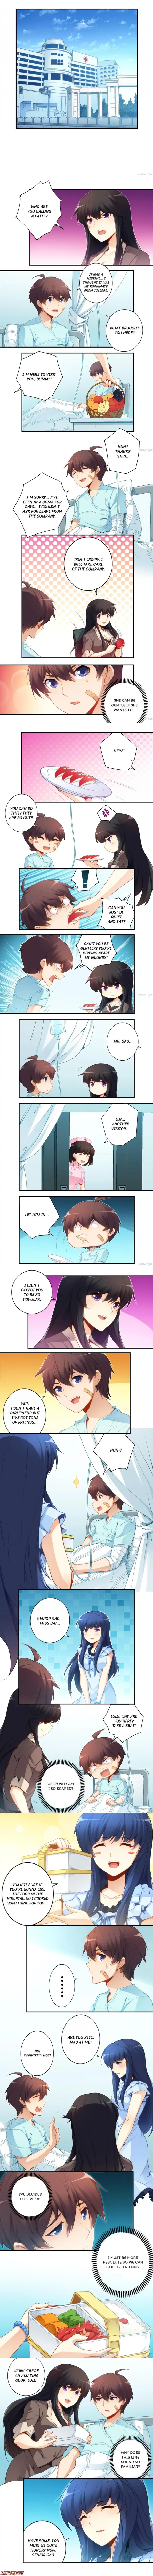 The Perfect Guy - Page 1